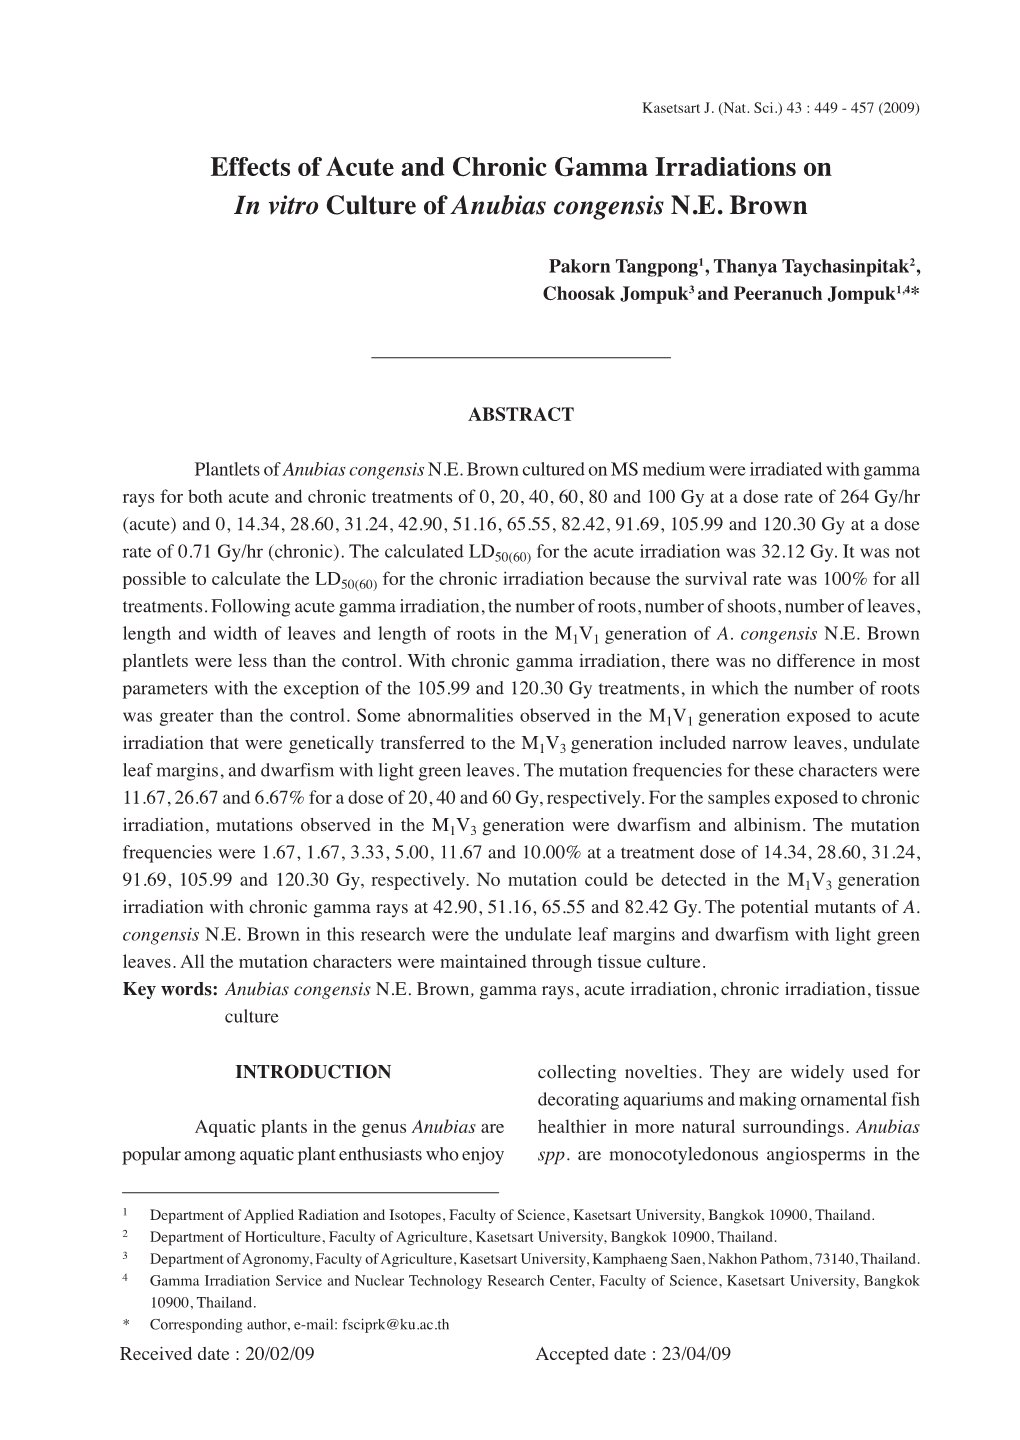 Effects of Acute and Chronic Gamma Irradiations on in Vitro Culture of Anubias Congensis N.E